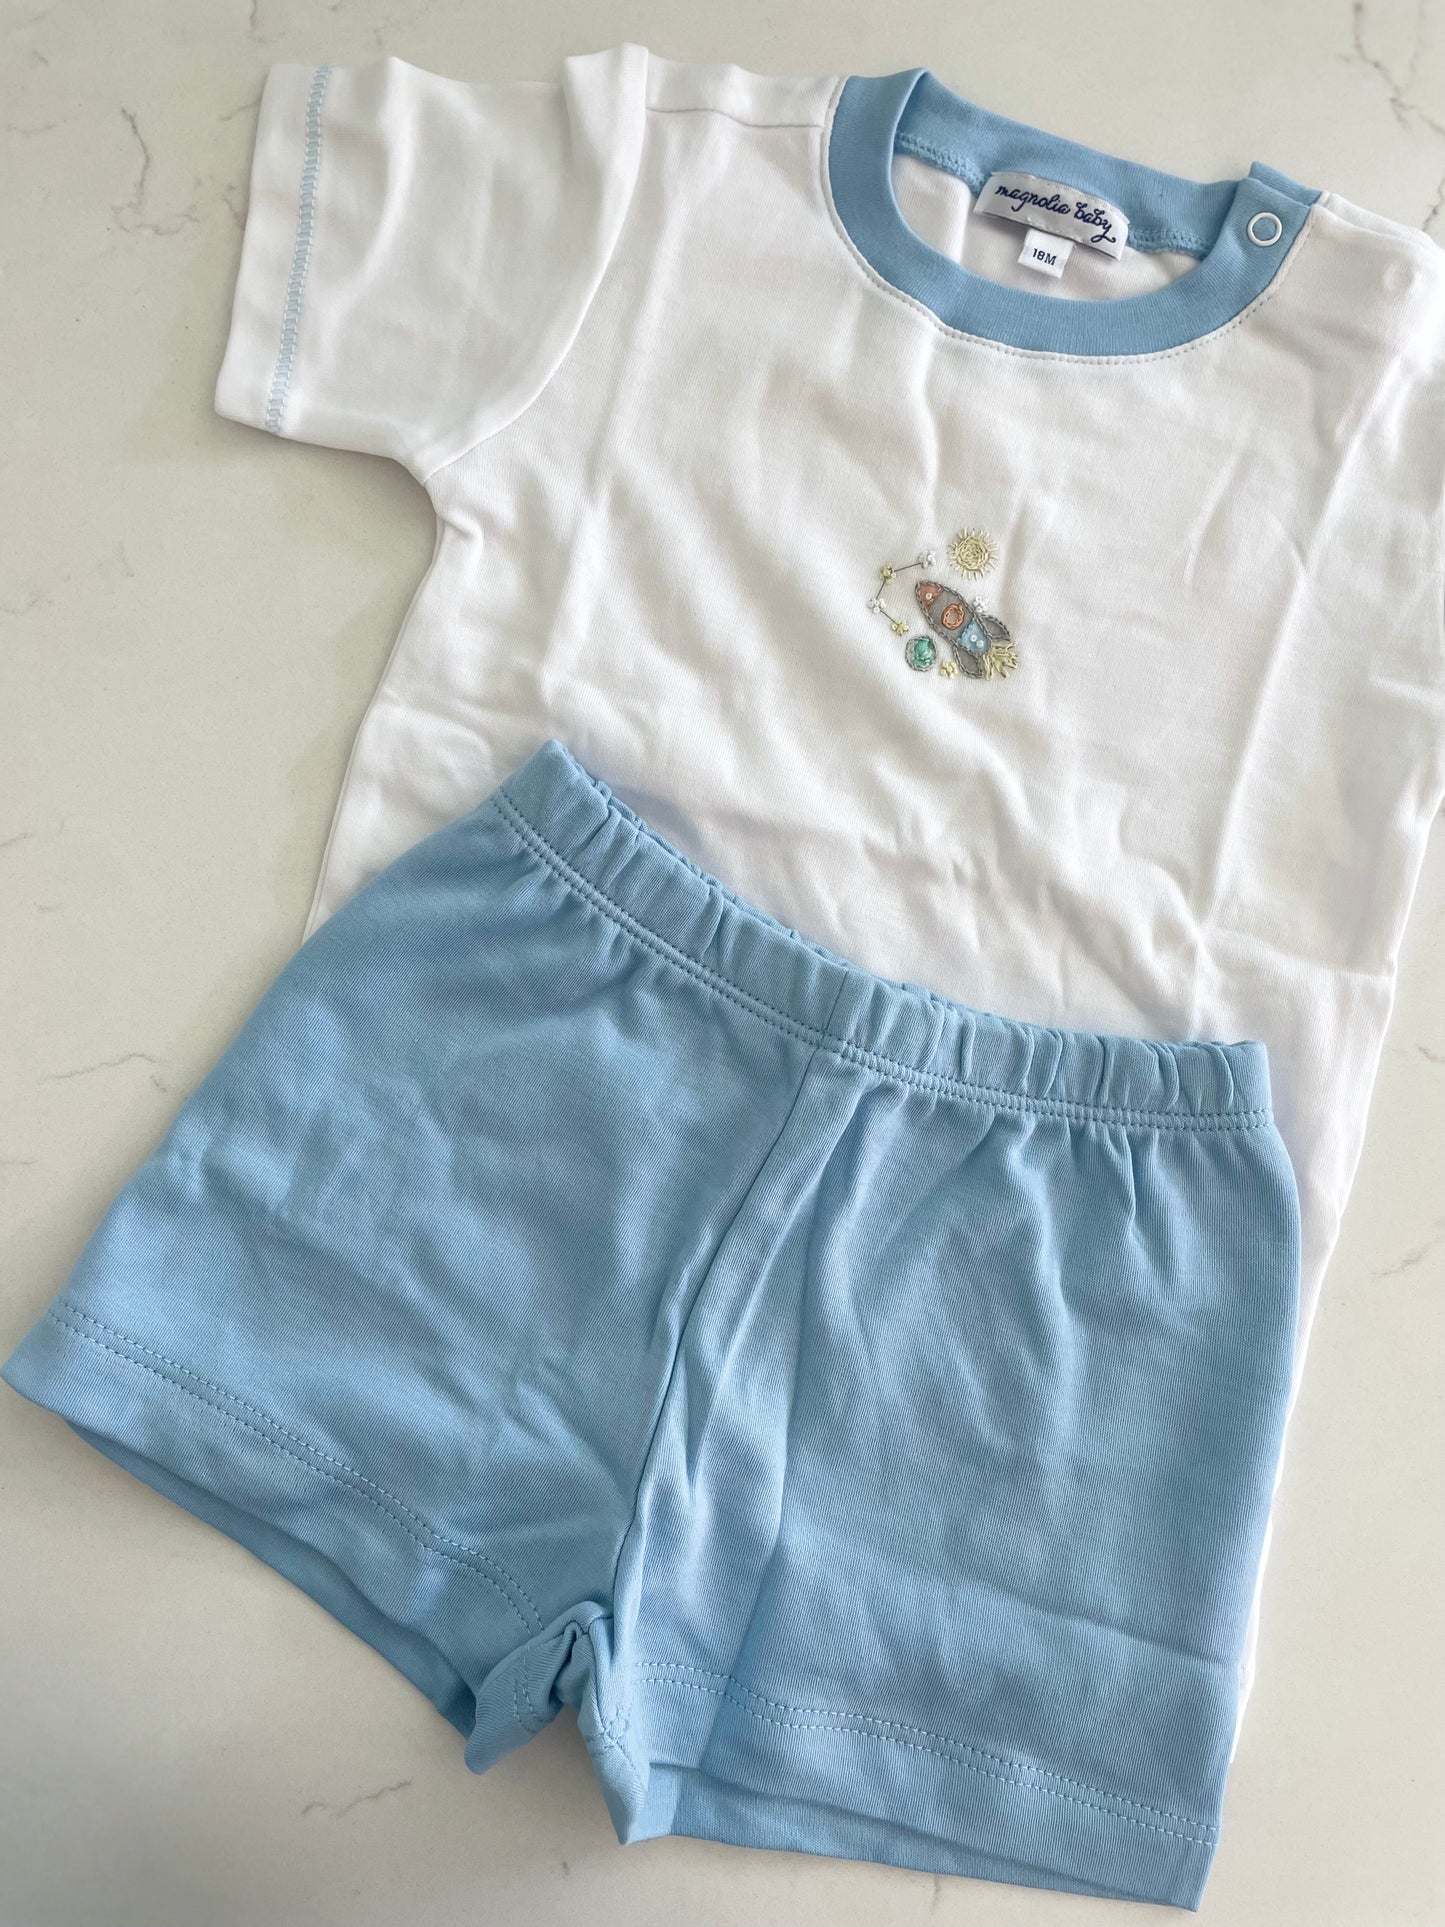 Magnolia Baby Out of this World Emb Short Set